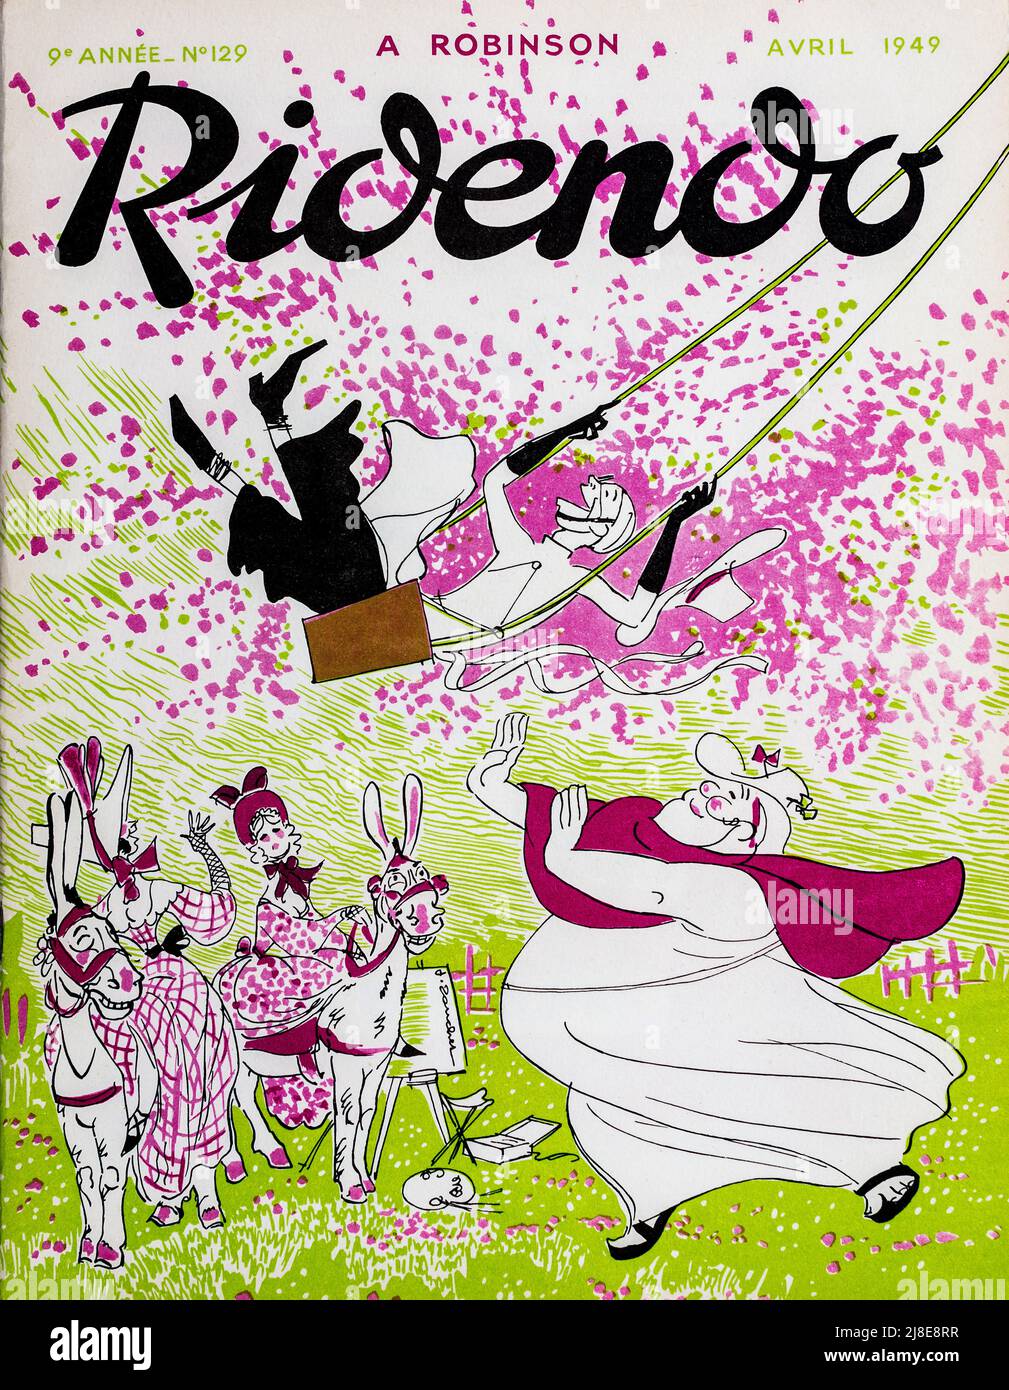 Cover of 'Ridendo' - April 1949 - French monthly humour magazine for doctors and medical workers. Stock Photo